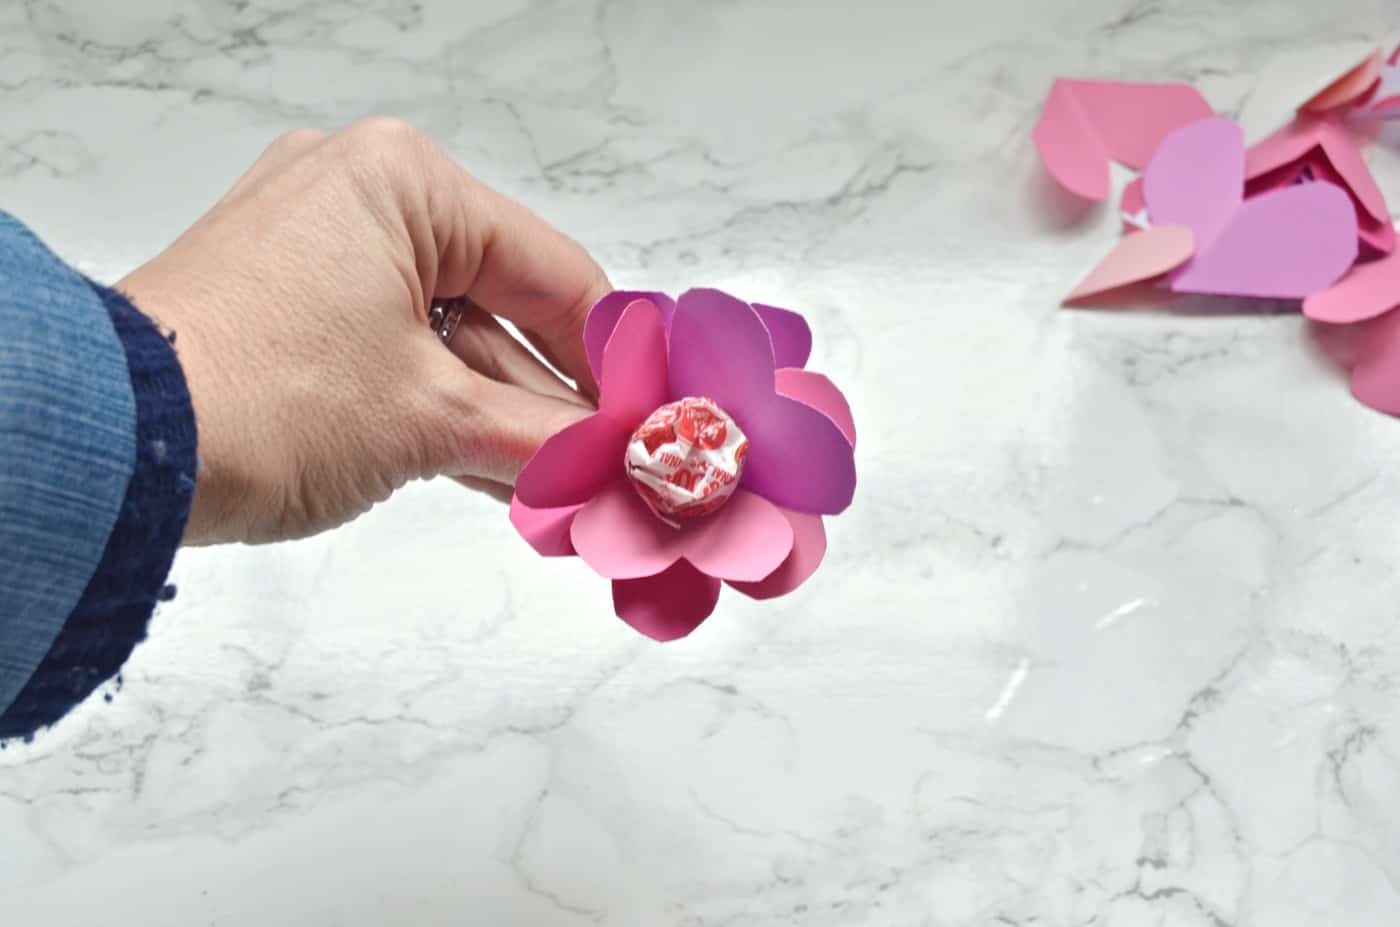 Simple and fast valentine's day crafts for under $1.